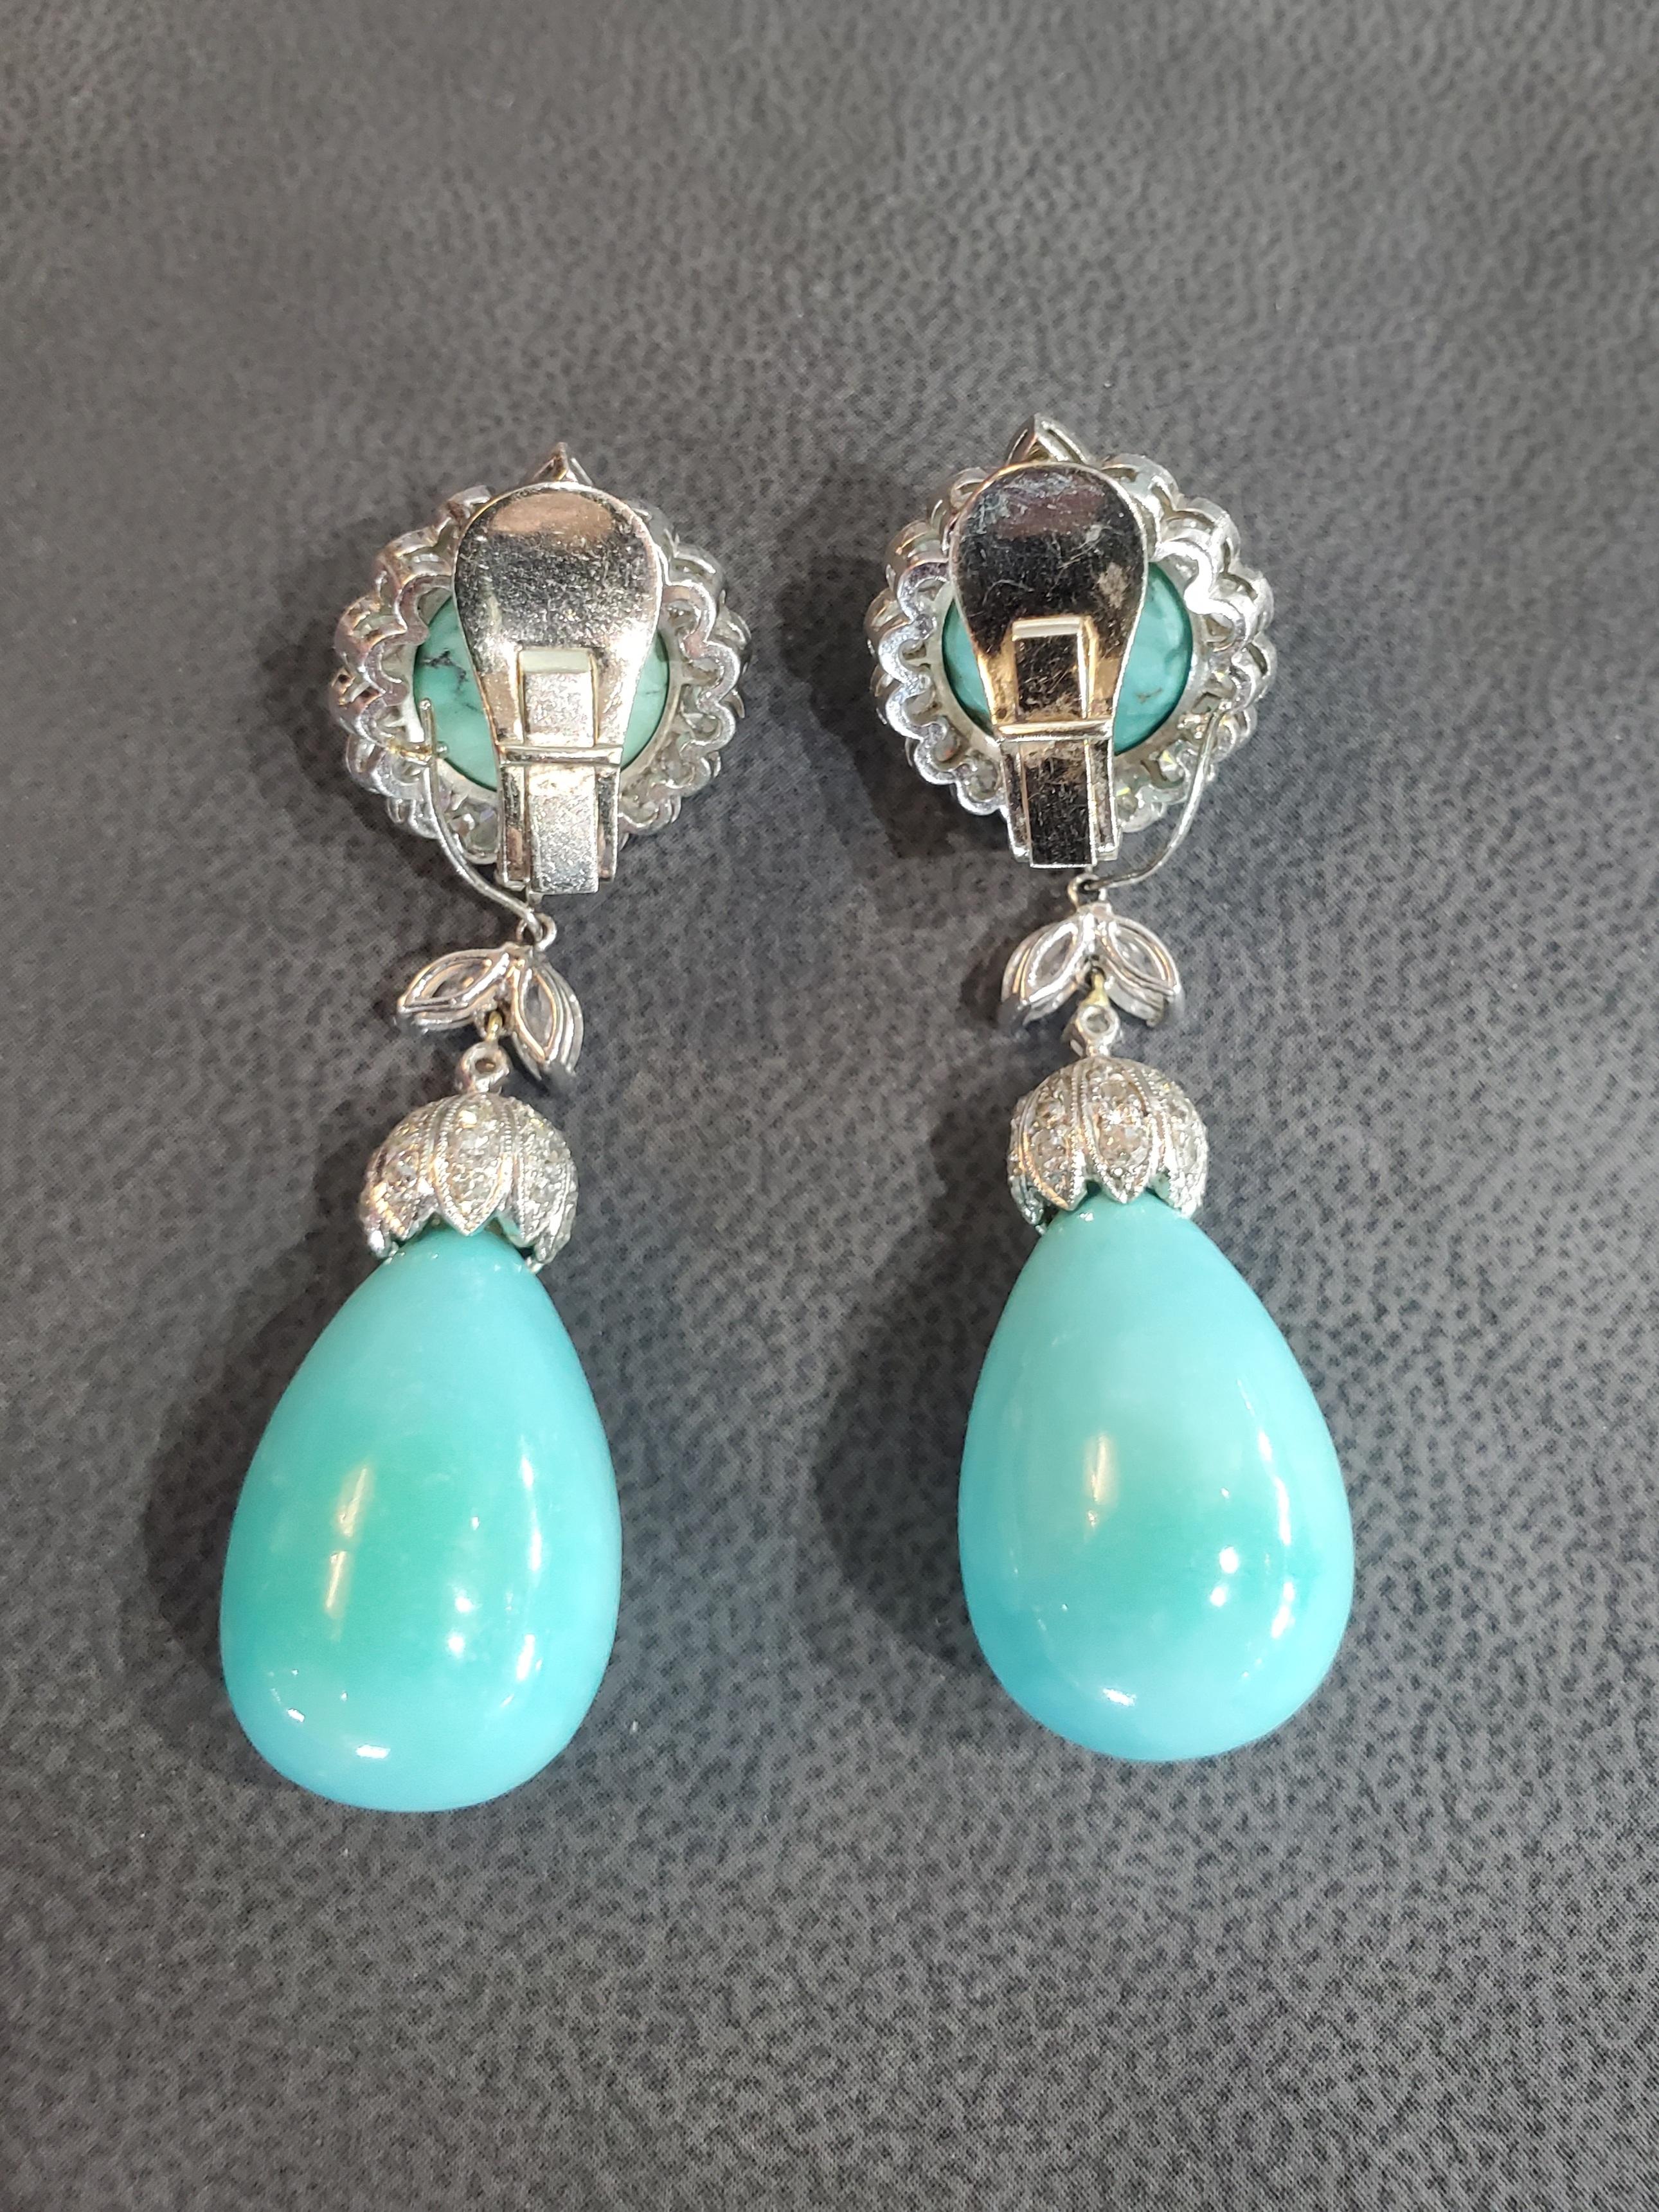 Iconic Van Cleef & Arpels Turquoise & Diamond 'Day and Night' Earrings 3